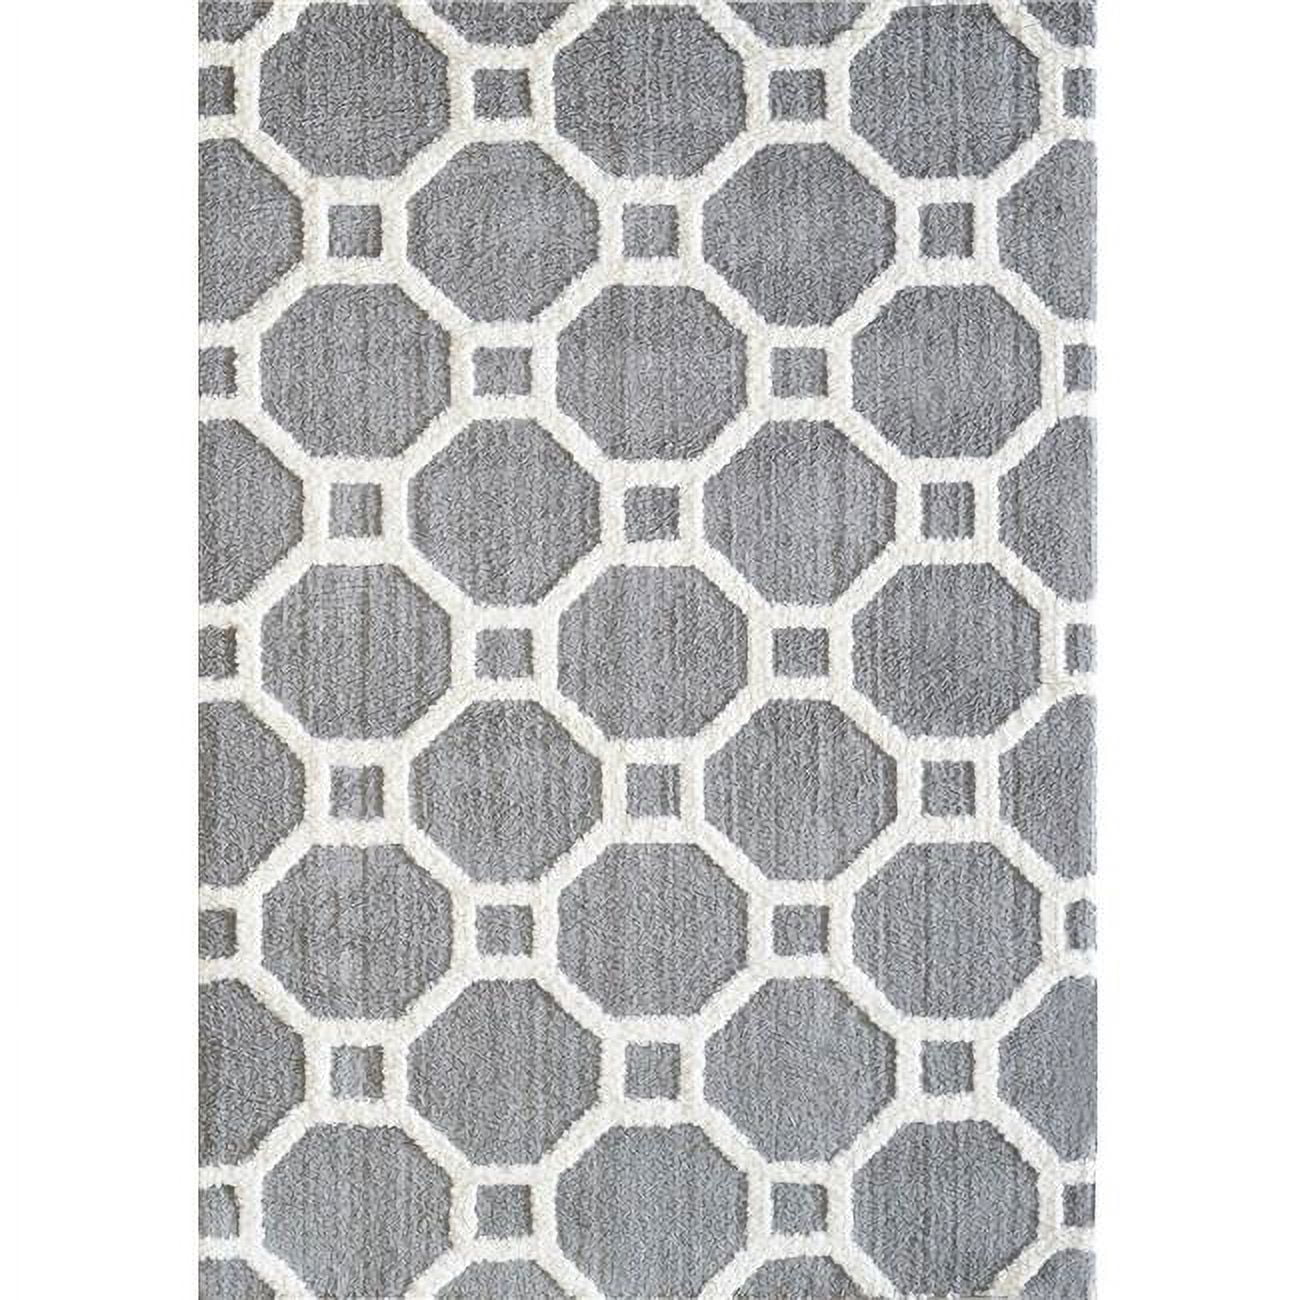 Si7105903901 6 Ft. 7 In. X 9 Ft. 6 In. Silky Shag 5903 Rectangle Contemporary Rug - 901 Silver & White